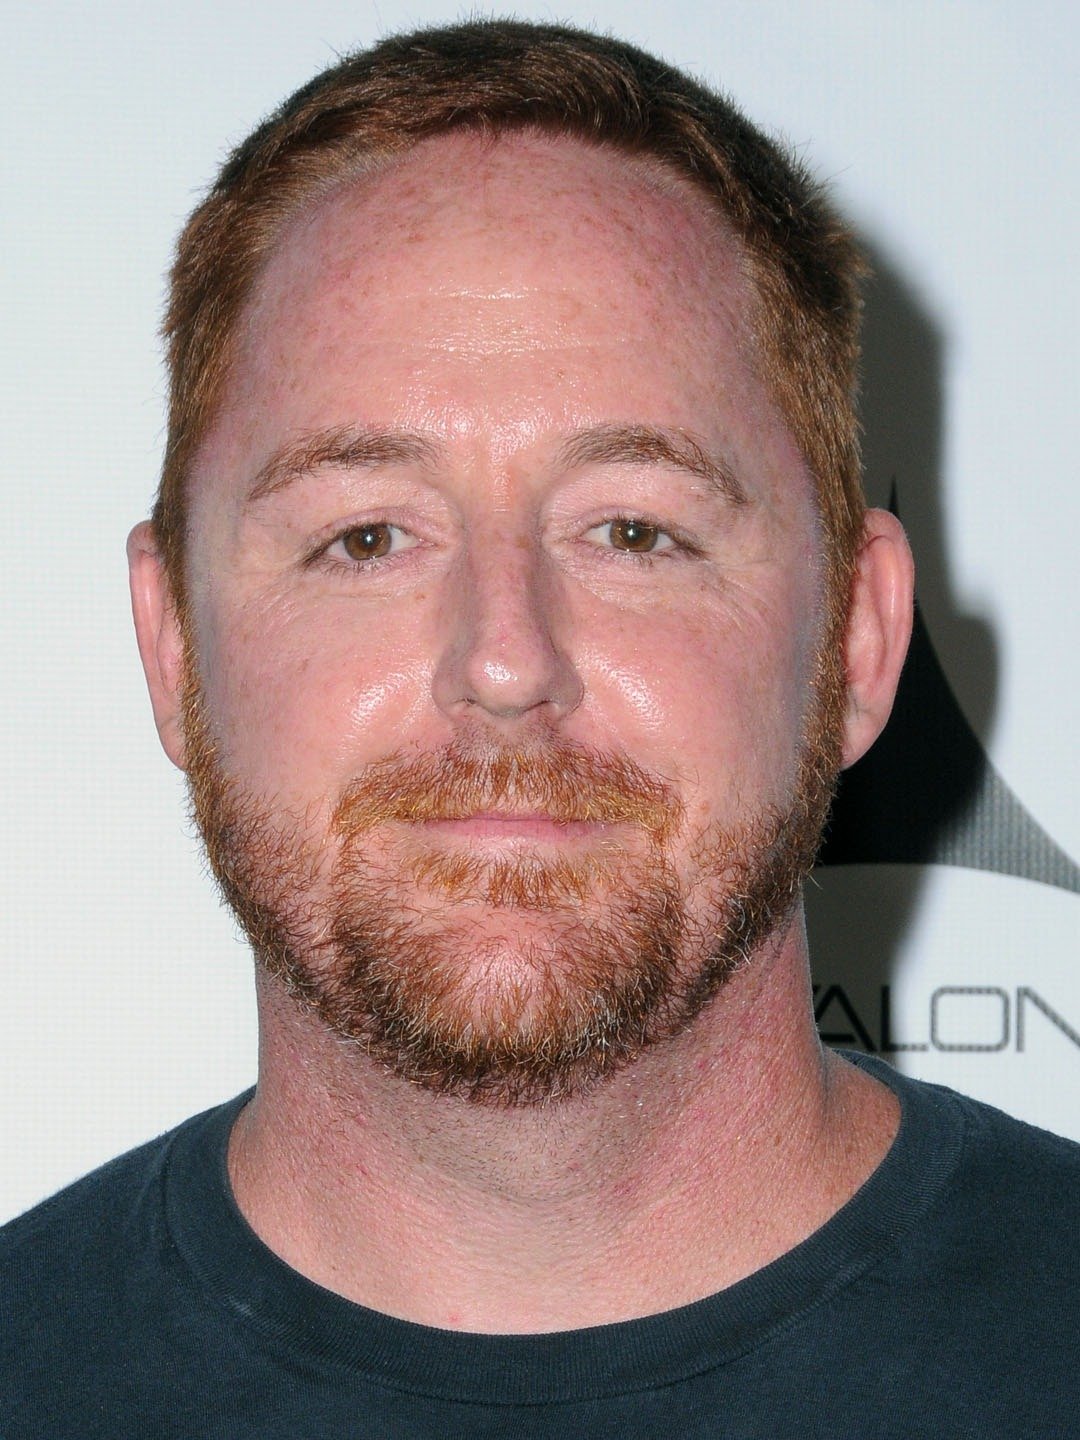 How tall is Scott Grimes?